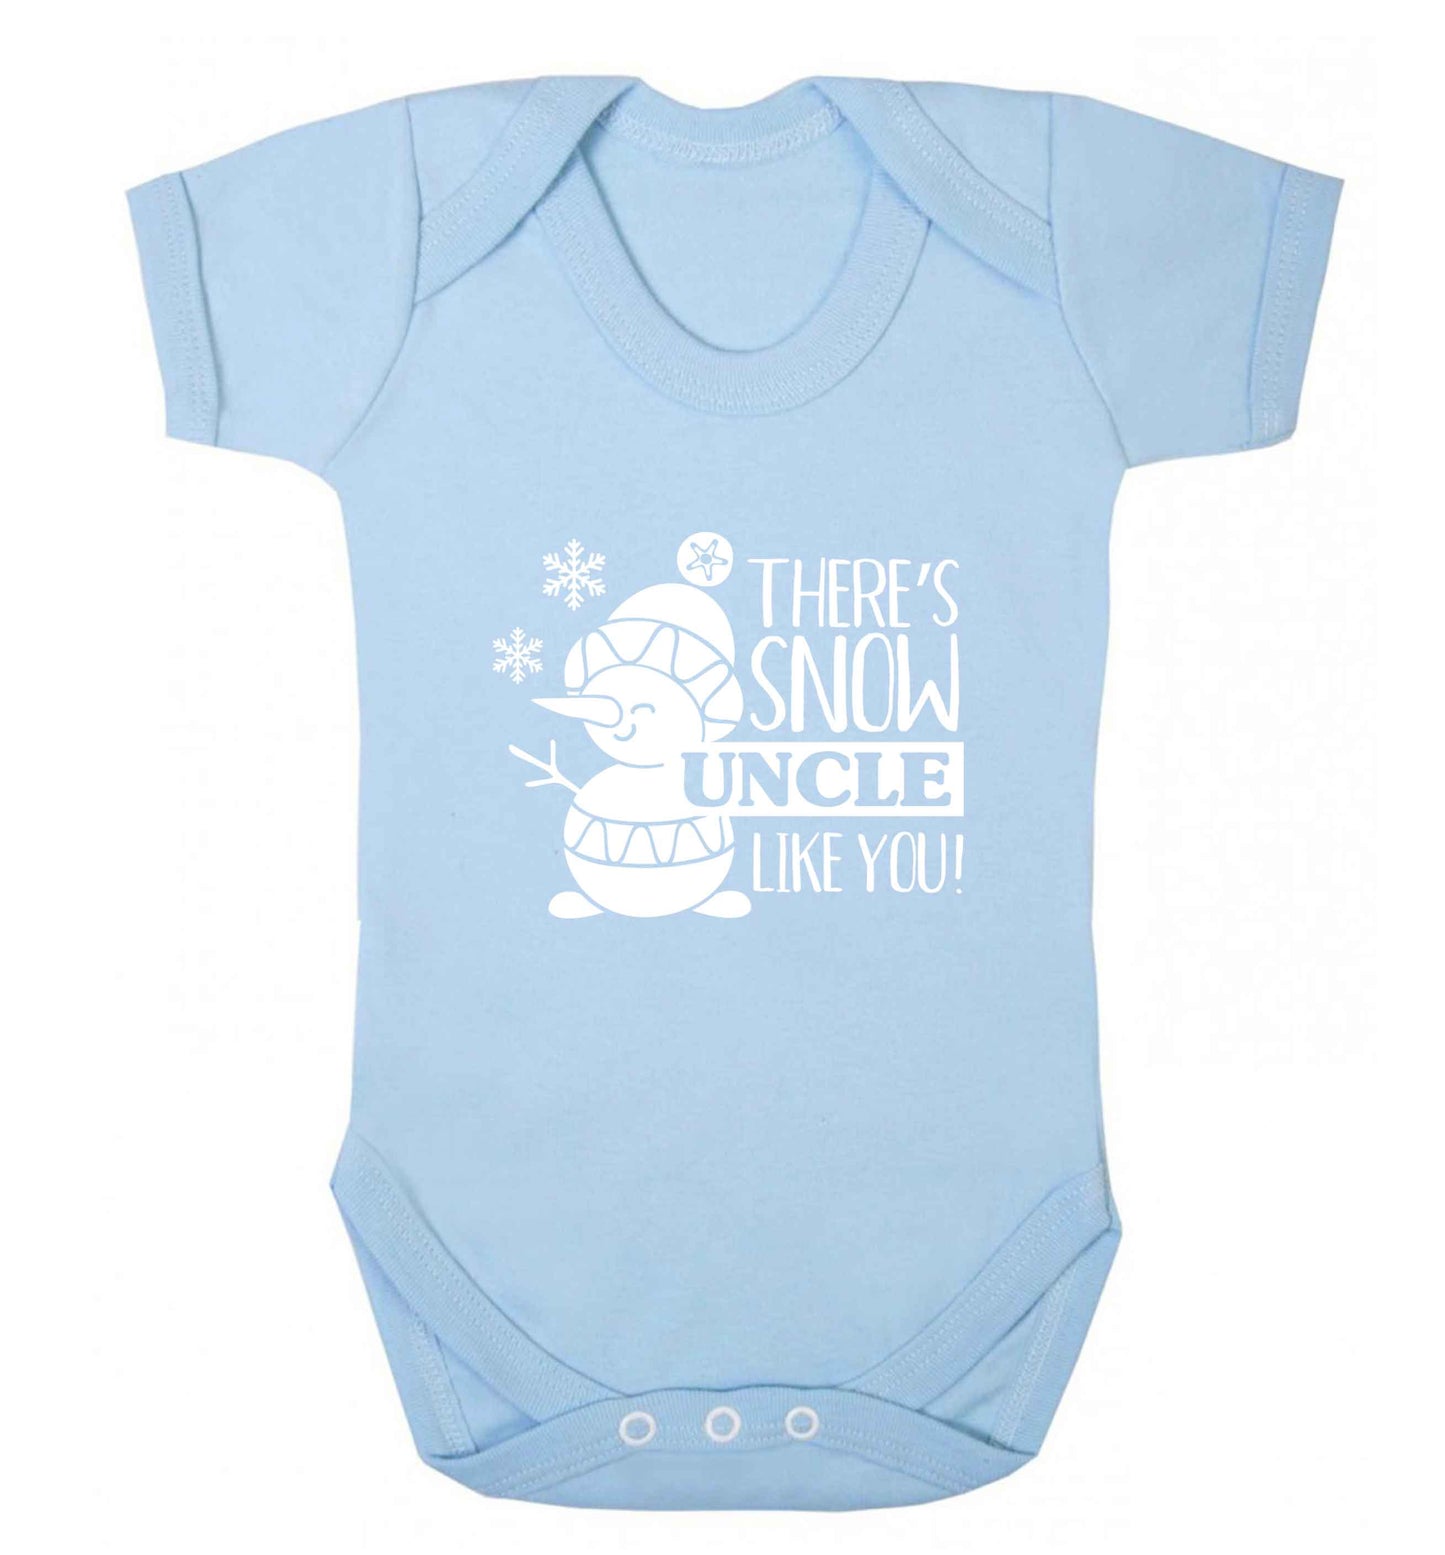 There's snow uncle like you baby vest pale blue 18-24 months